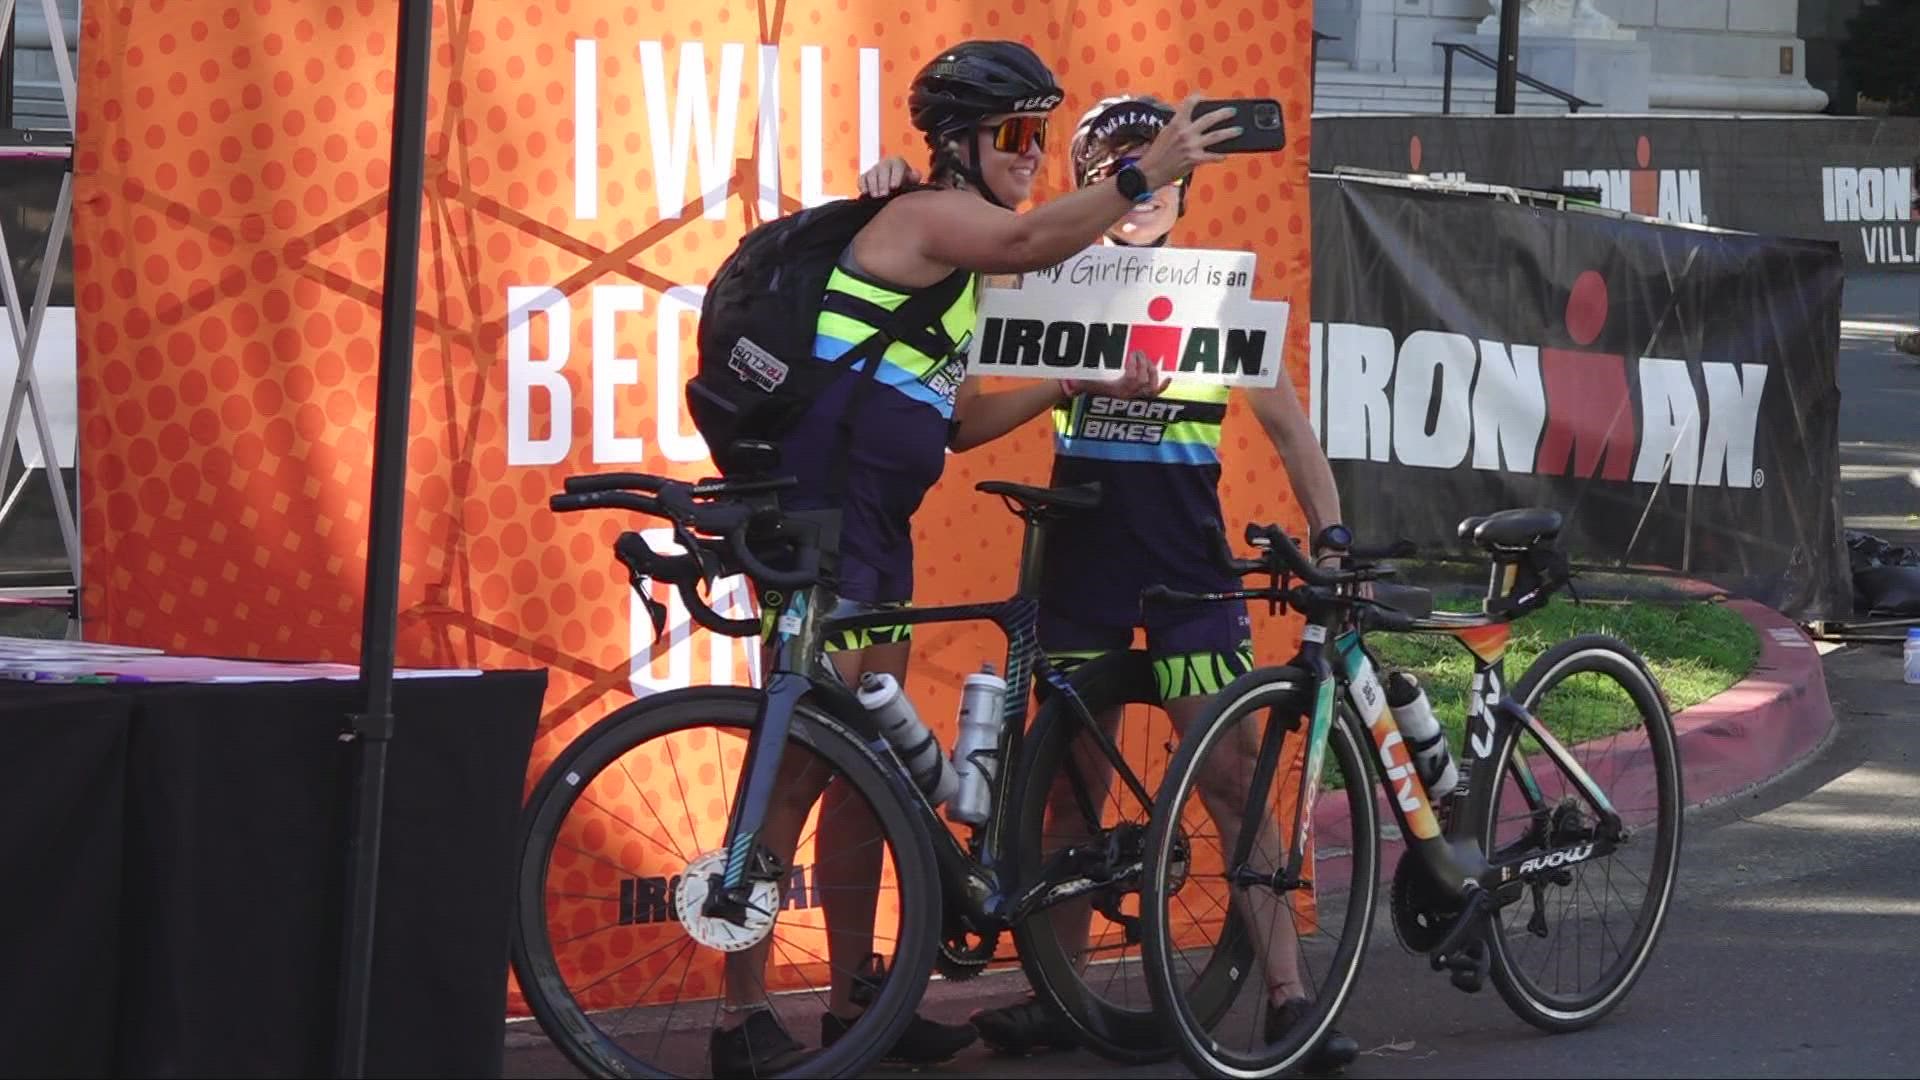 After last year's scheduled Ironman event was rained out, more than 4,000 athletes are ready to race this weekend.